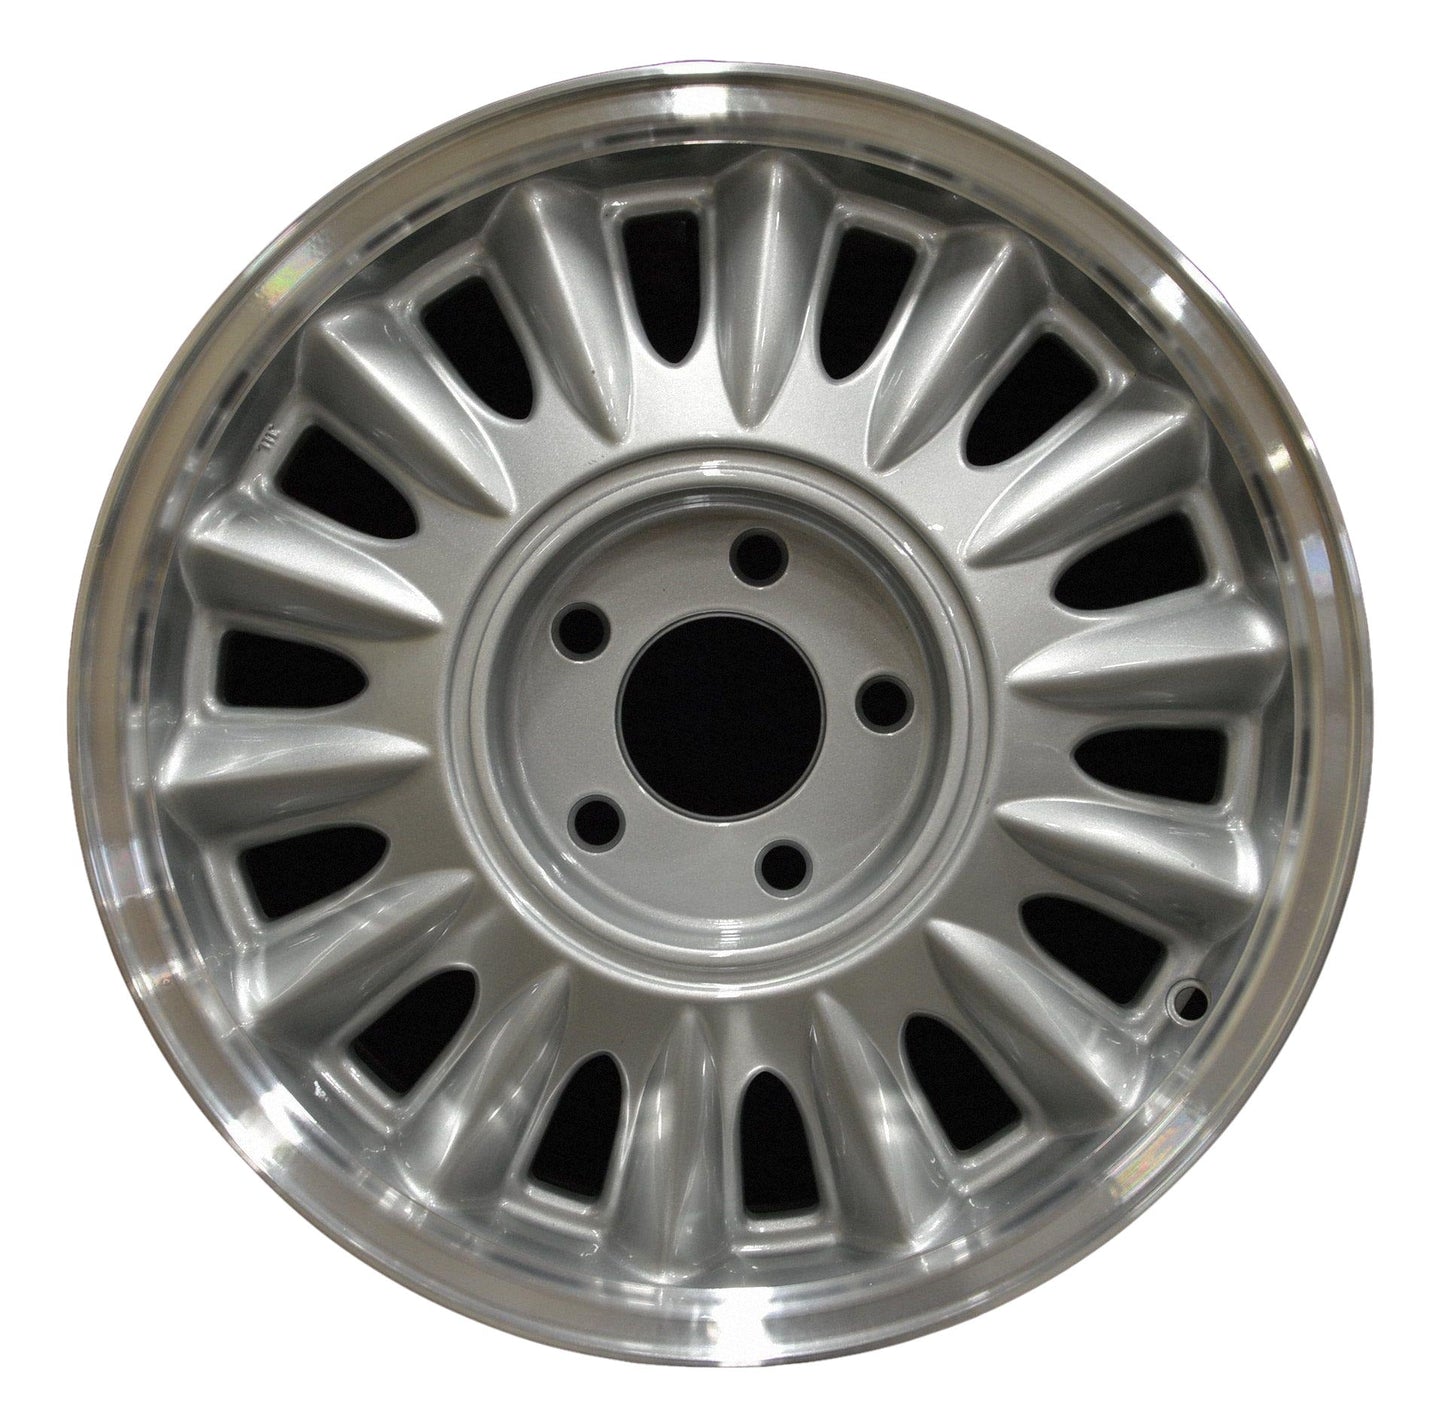 Cadillac Deville  1994, 1995, 1996, 1997 Factory OEM Car Wheel Size 16x7 Alloy WAO.4516.PS01.FC